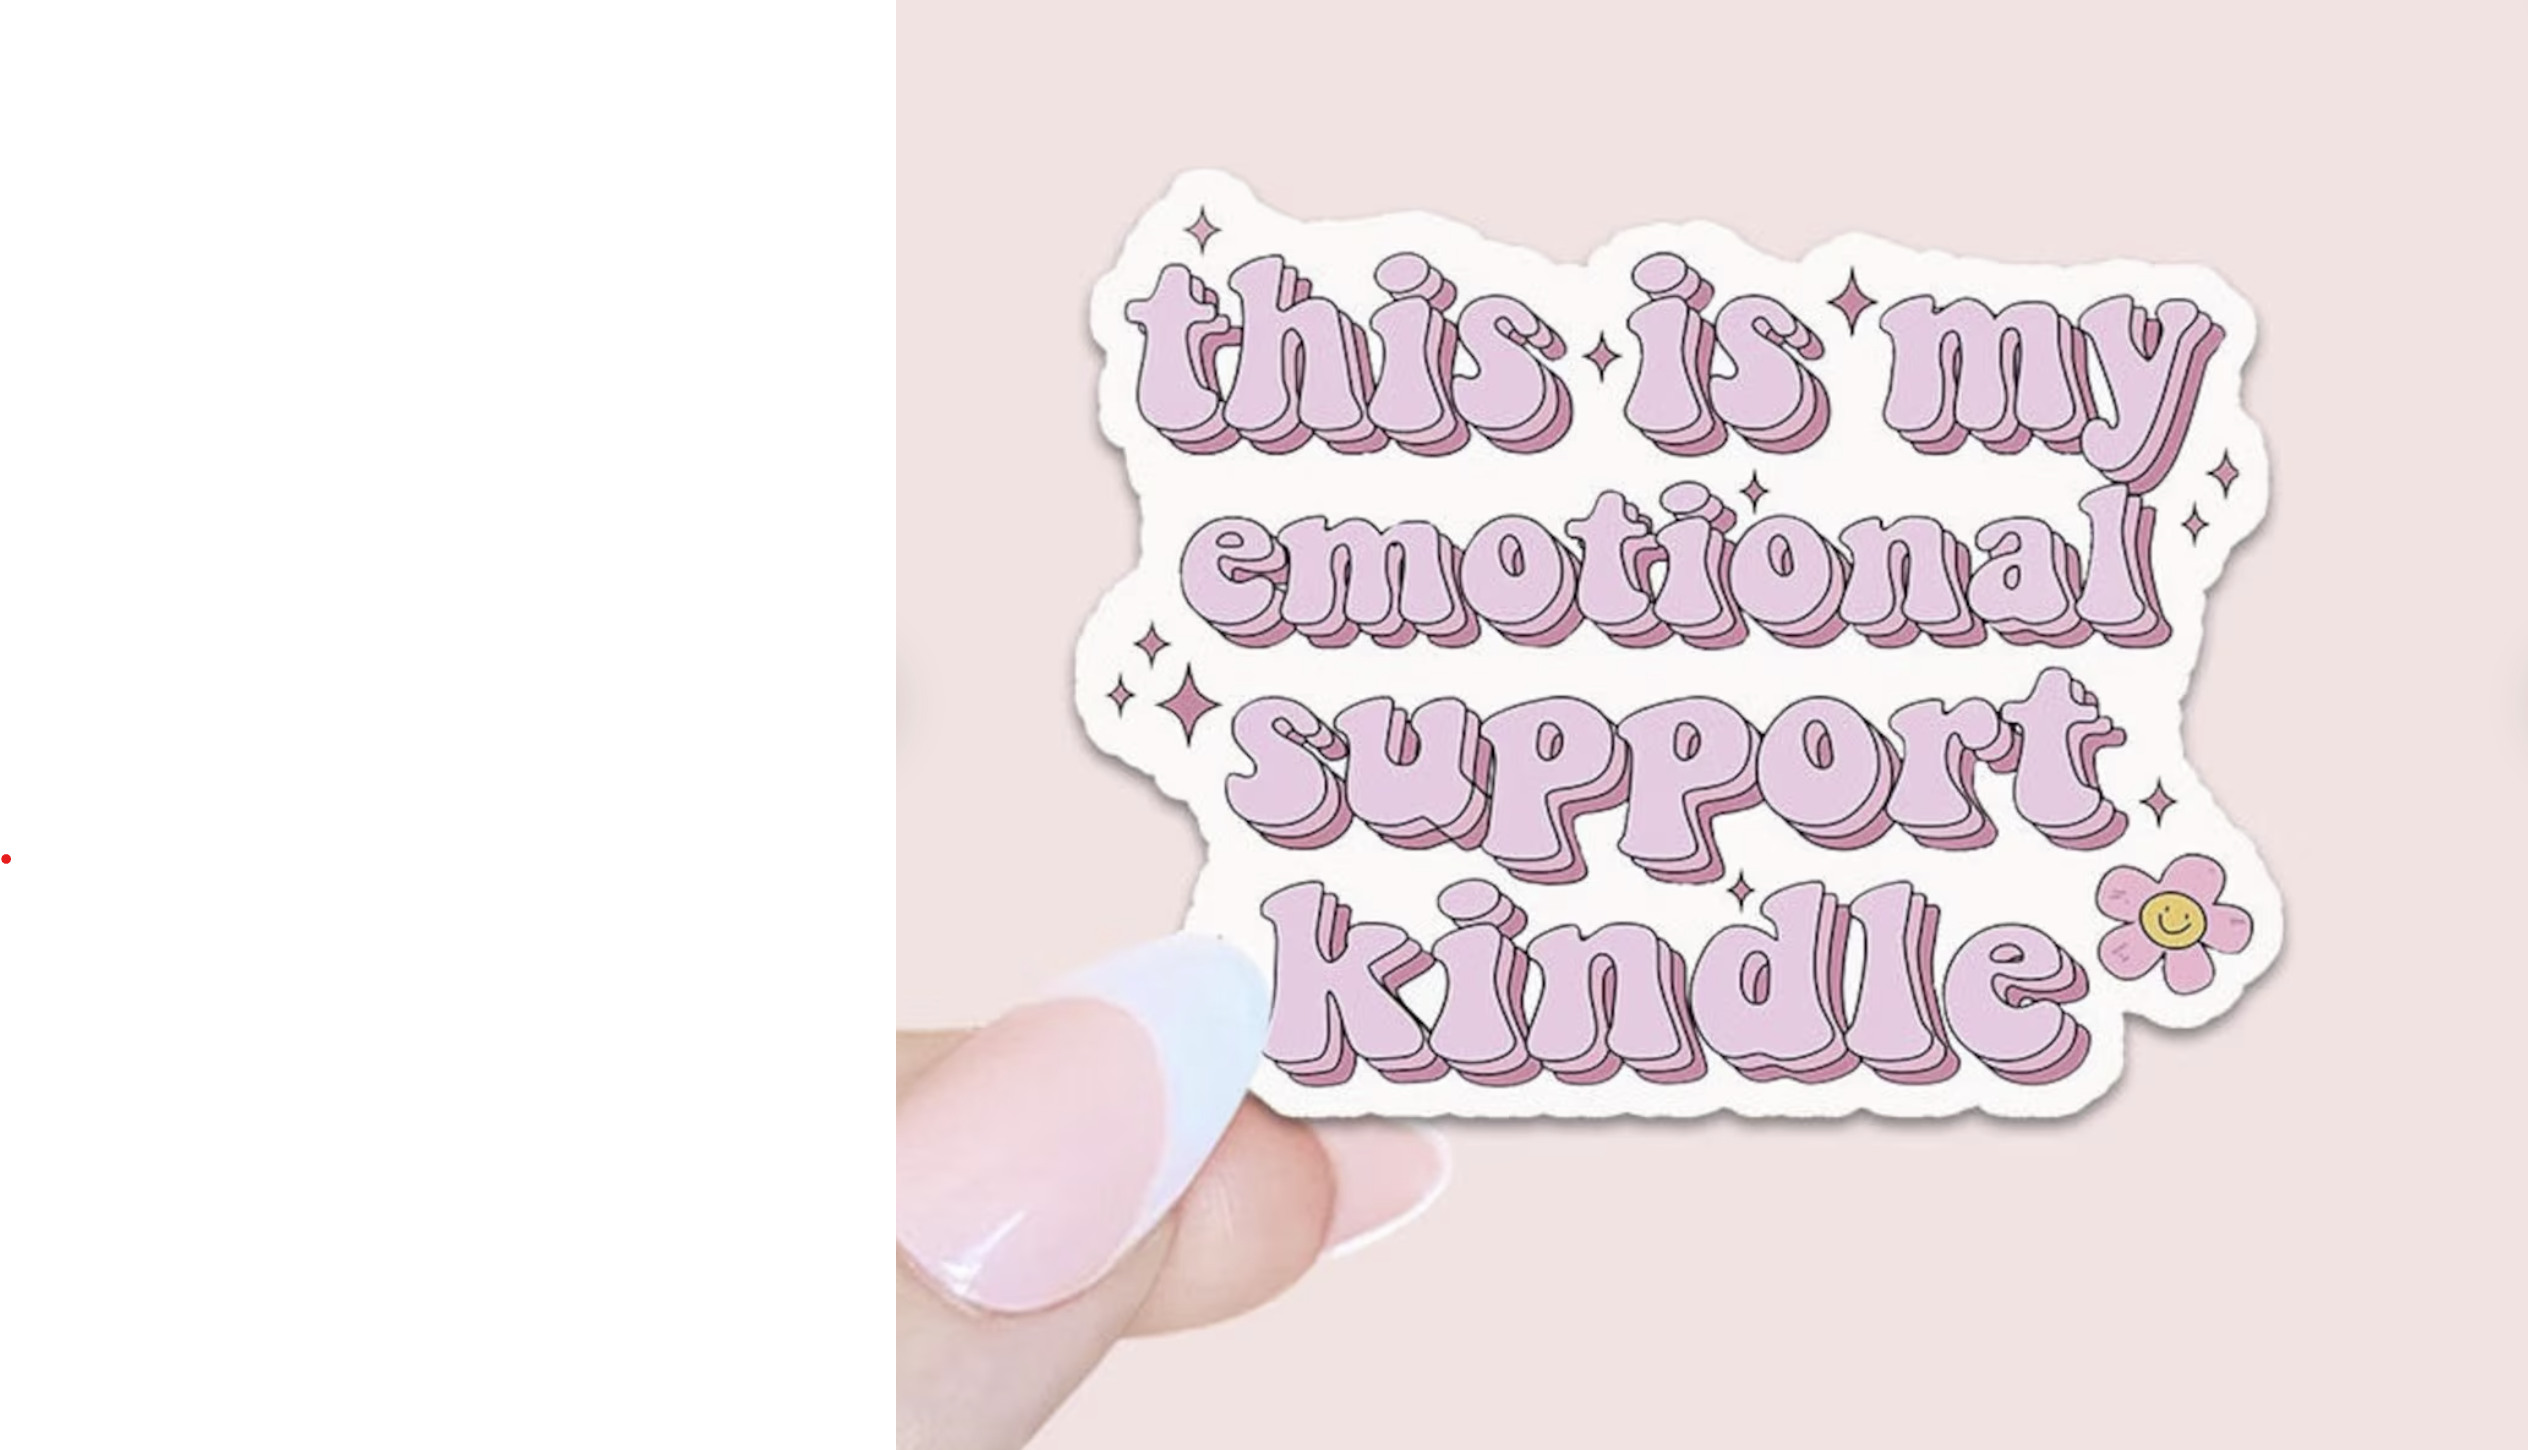 Typography sticker with lavender bubble letters reading "this is my emotional support kindle" with stars and a daisy decorating the edges